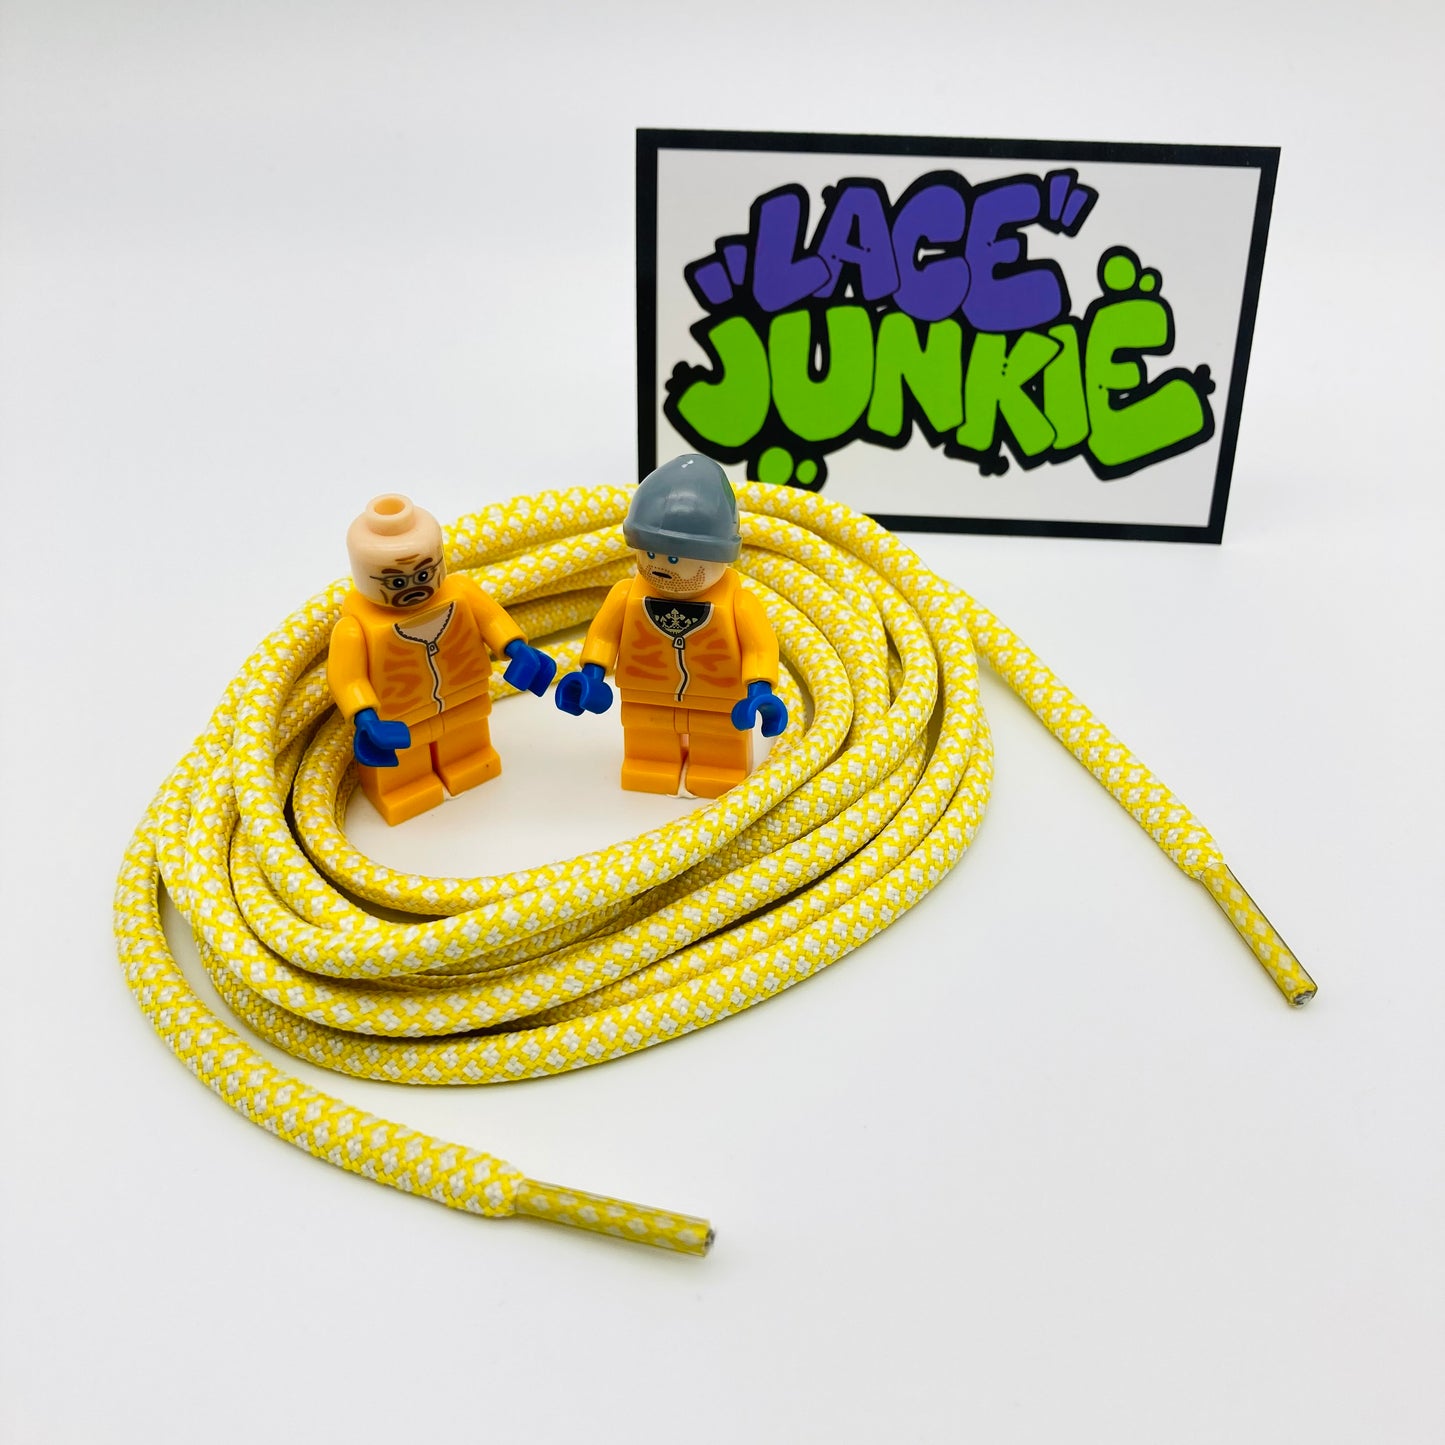 Lace Junkie White / Bright Yellow Two Colour Rope Laces